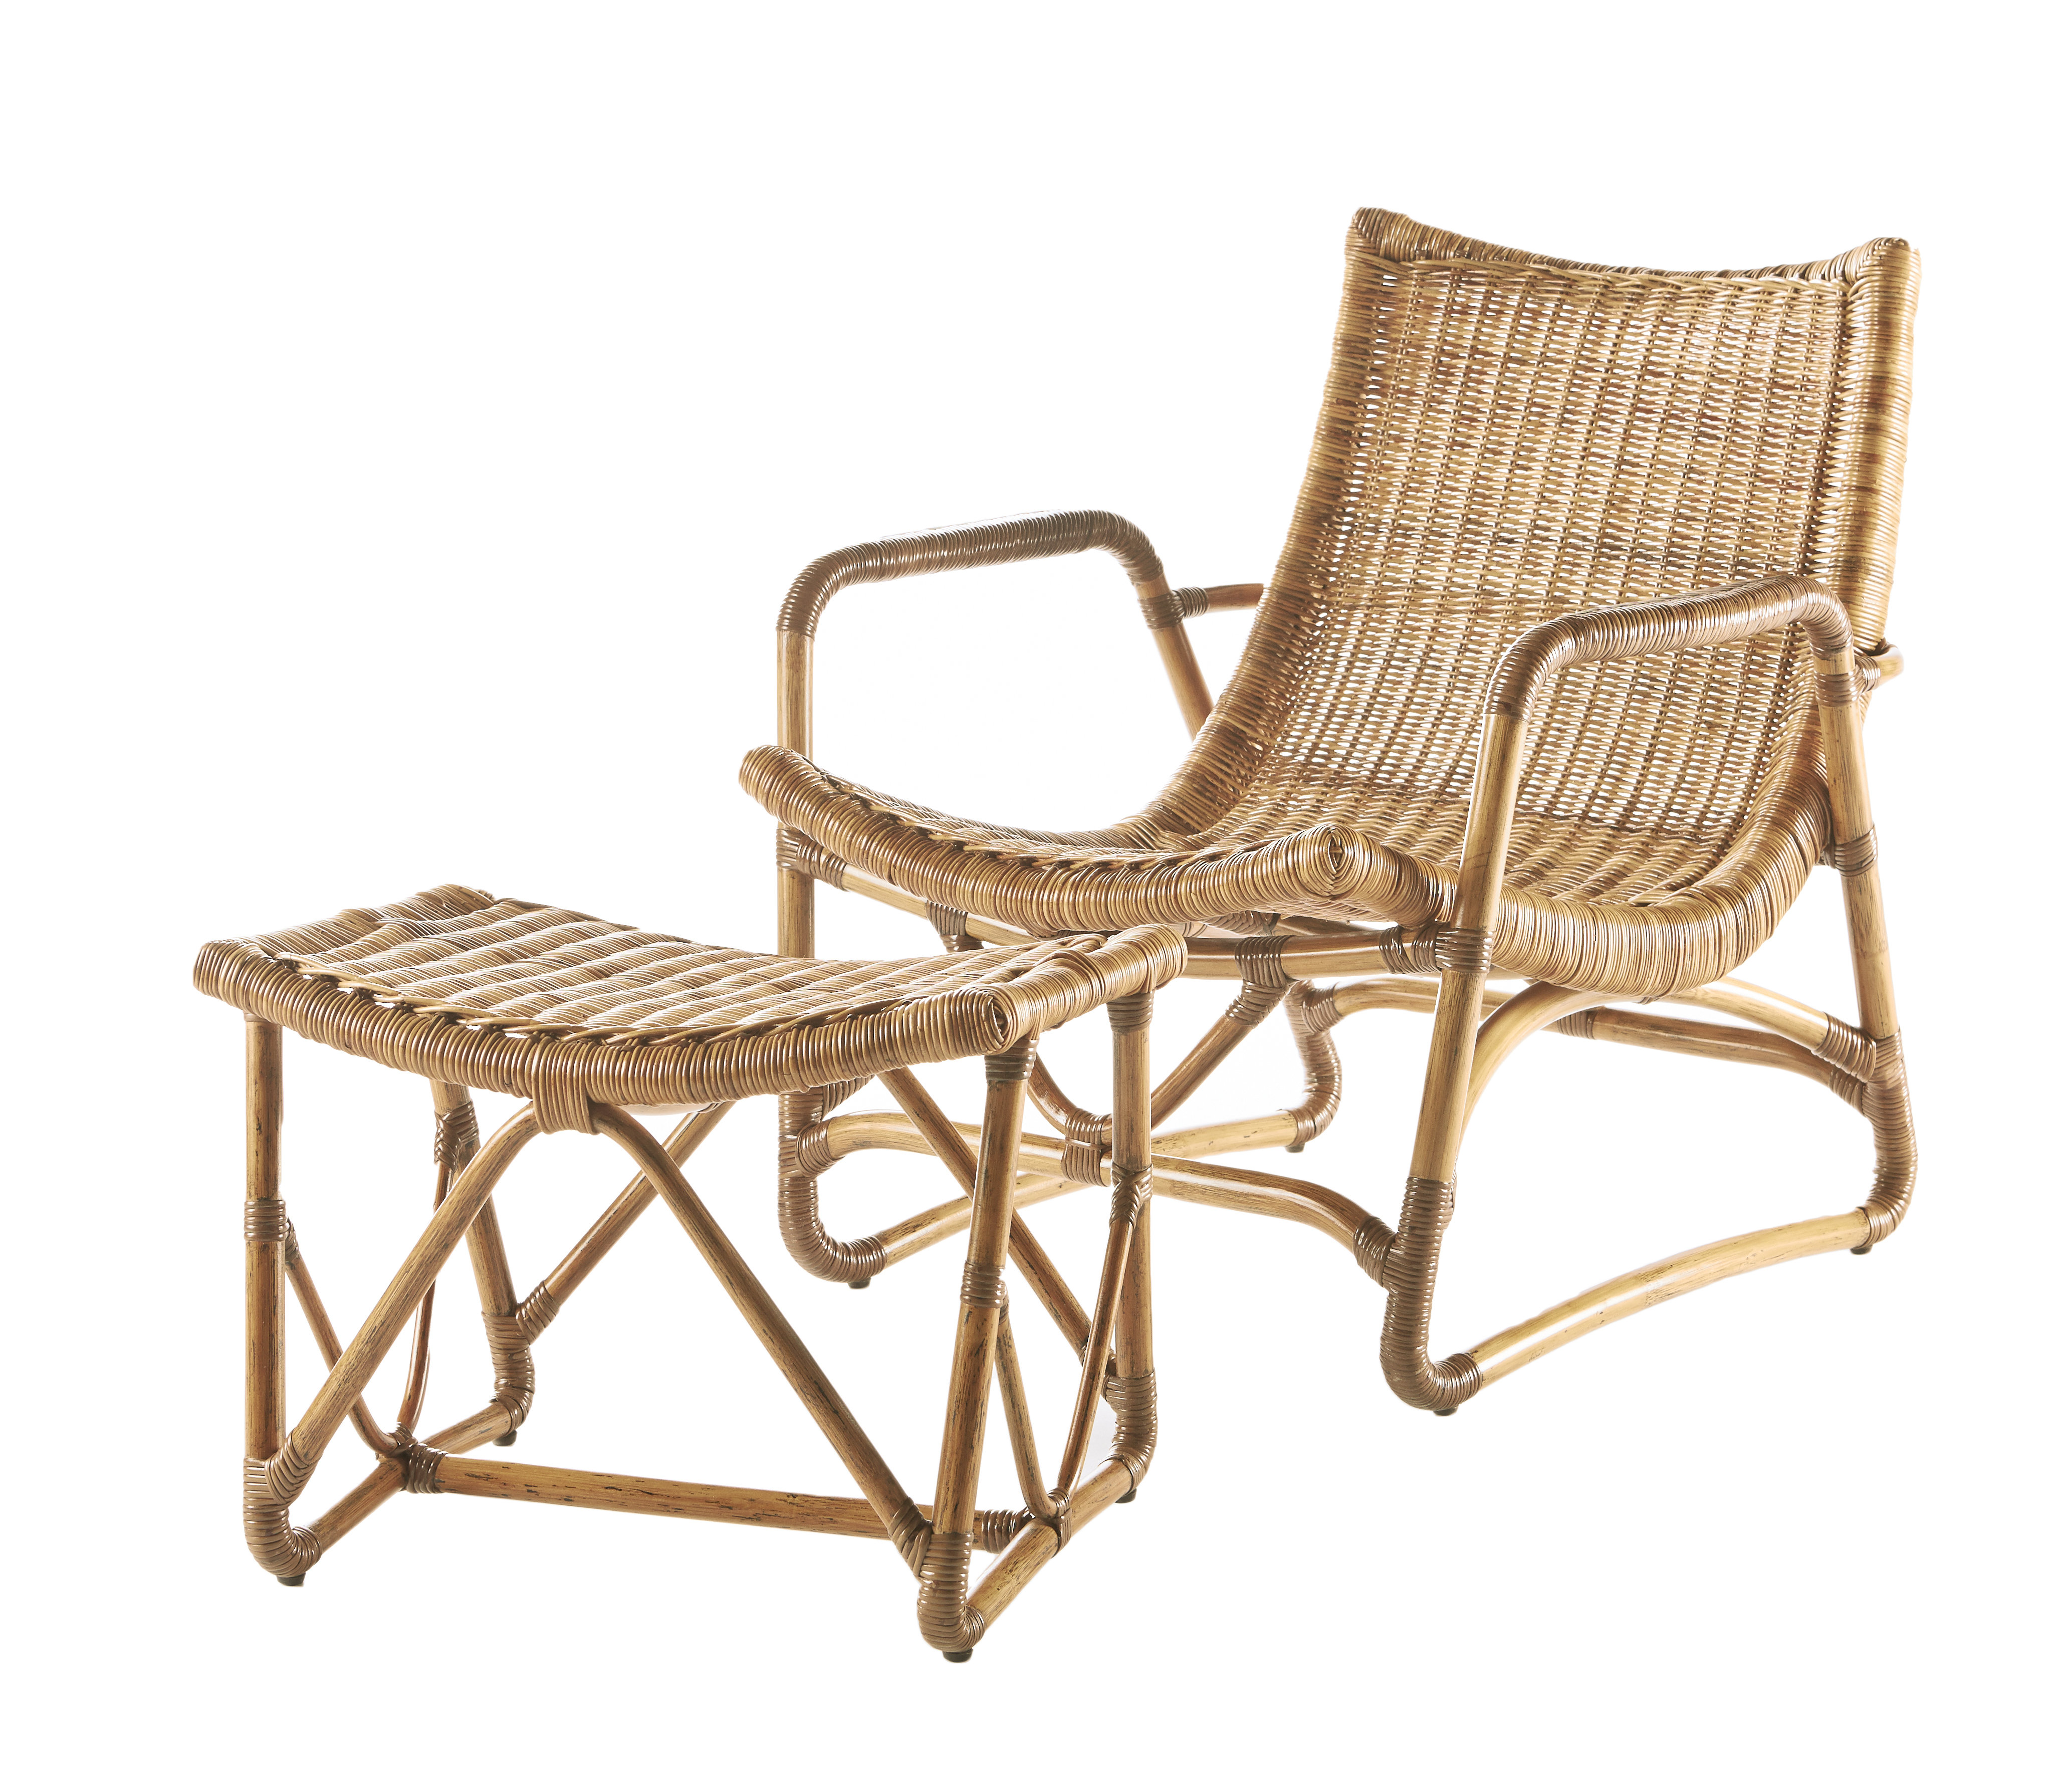 Antique Farmhouse Classic Rattan Lounge Chair and Foot Rest Set